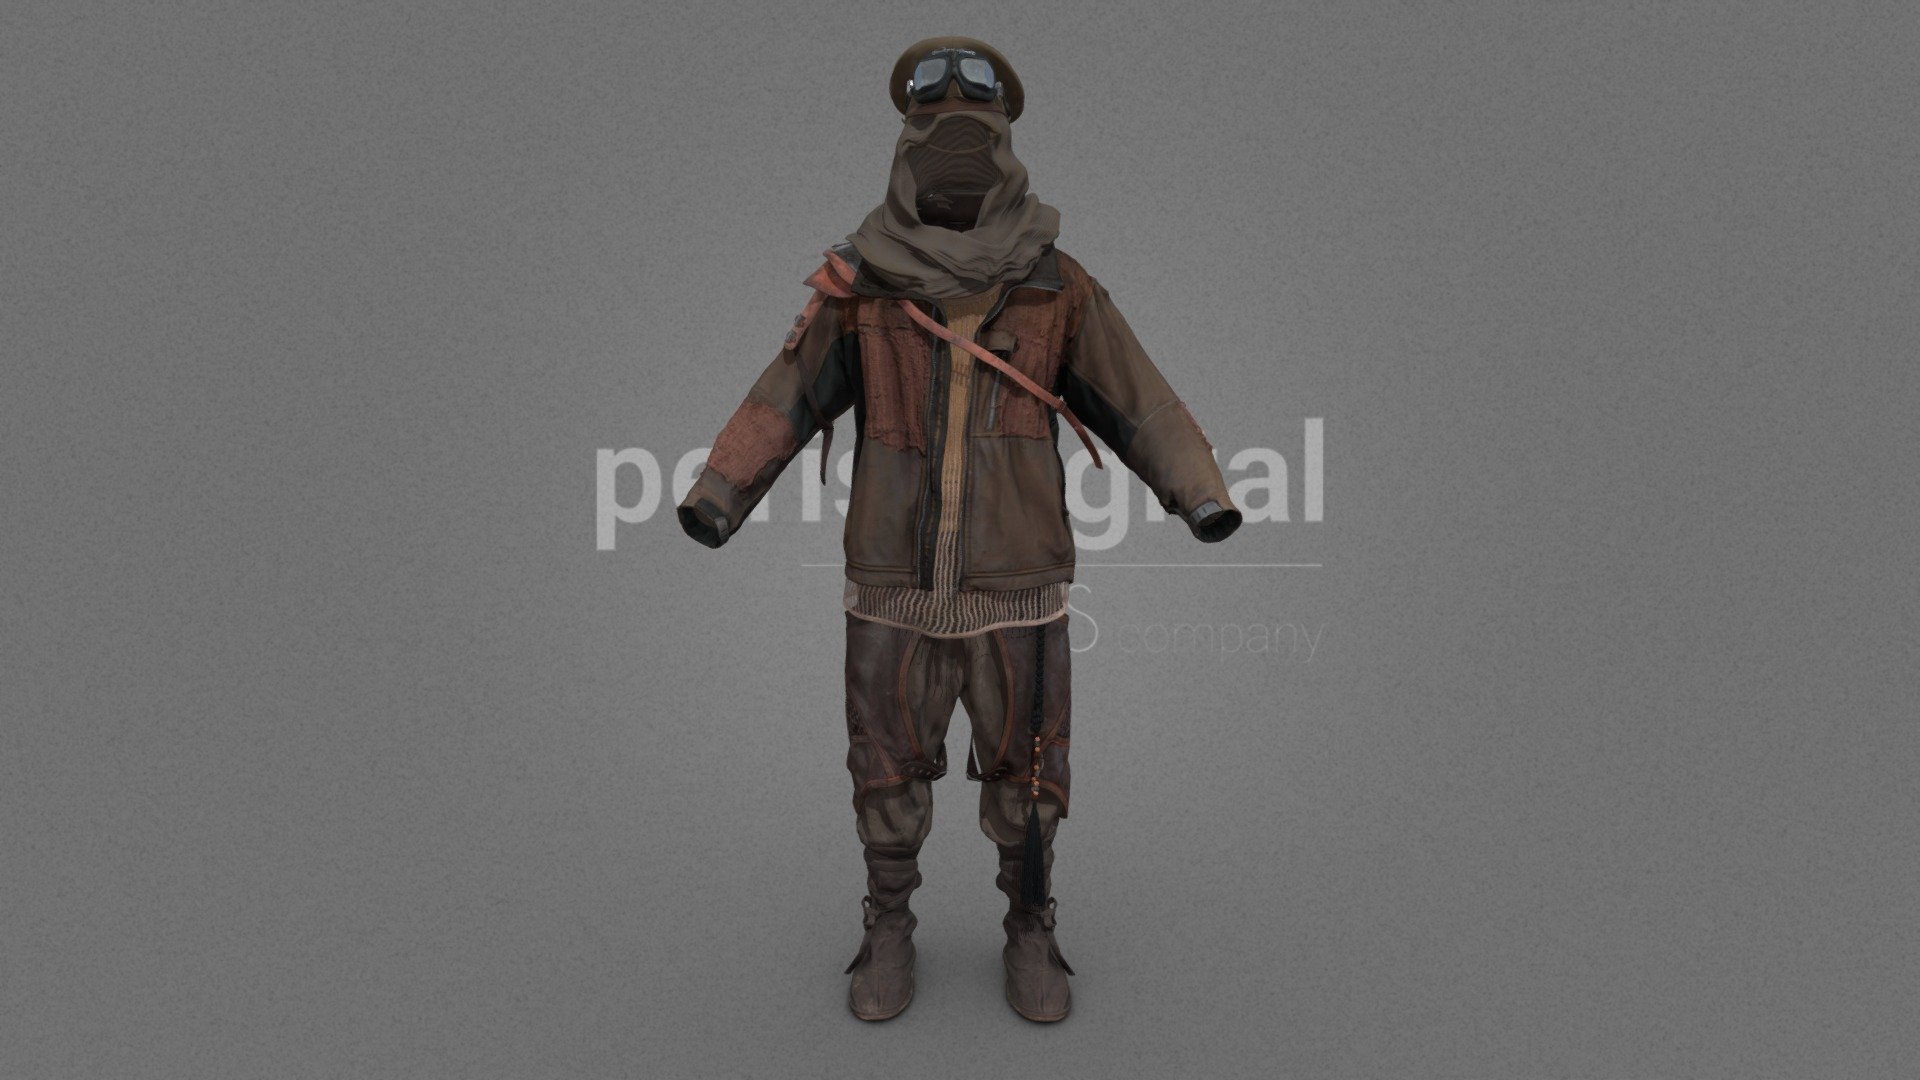 Military visor cap with brown leather visor, aviator or biker glasses, gray hooded scarf, brown zippered parka jacket with worn leather cross strap and shoulder pad, brown short sleeve wire shirt, brown tank top, brown leather military trousers with buckles and black braided cord with beads, brown suede bots.




They are optimized for use in 3D scenes of high polygonalization and optimized for rendering.

We do not include characters, but they are positioned for you to include and adjust your own character.

They have a model LOW (_LODRIG) inside the Blender file (included in the AdditionalFiles), which you can use for vertex weighting or cloth simulation and thus, make the transfer of vertices or property masks from the LOW to the HIGH** model

We have included the texture maps in high resolution, as well as the Displacement maps, so you can make extreme point of view with your 3D cameras, as well as the Blender file so you can edit any aspect of the set. 

Enjoy it.

Web: https://peris.digital/ - Wasteland Series - Model 08 - 3D model by Peris Digital (@perisdigital) 3d model